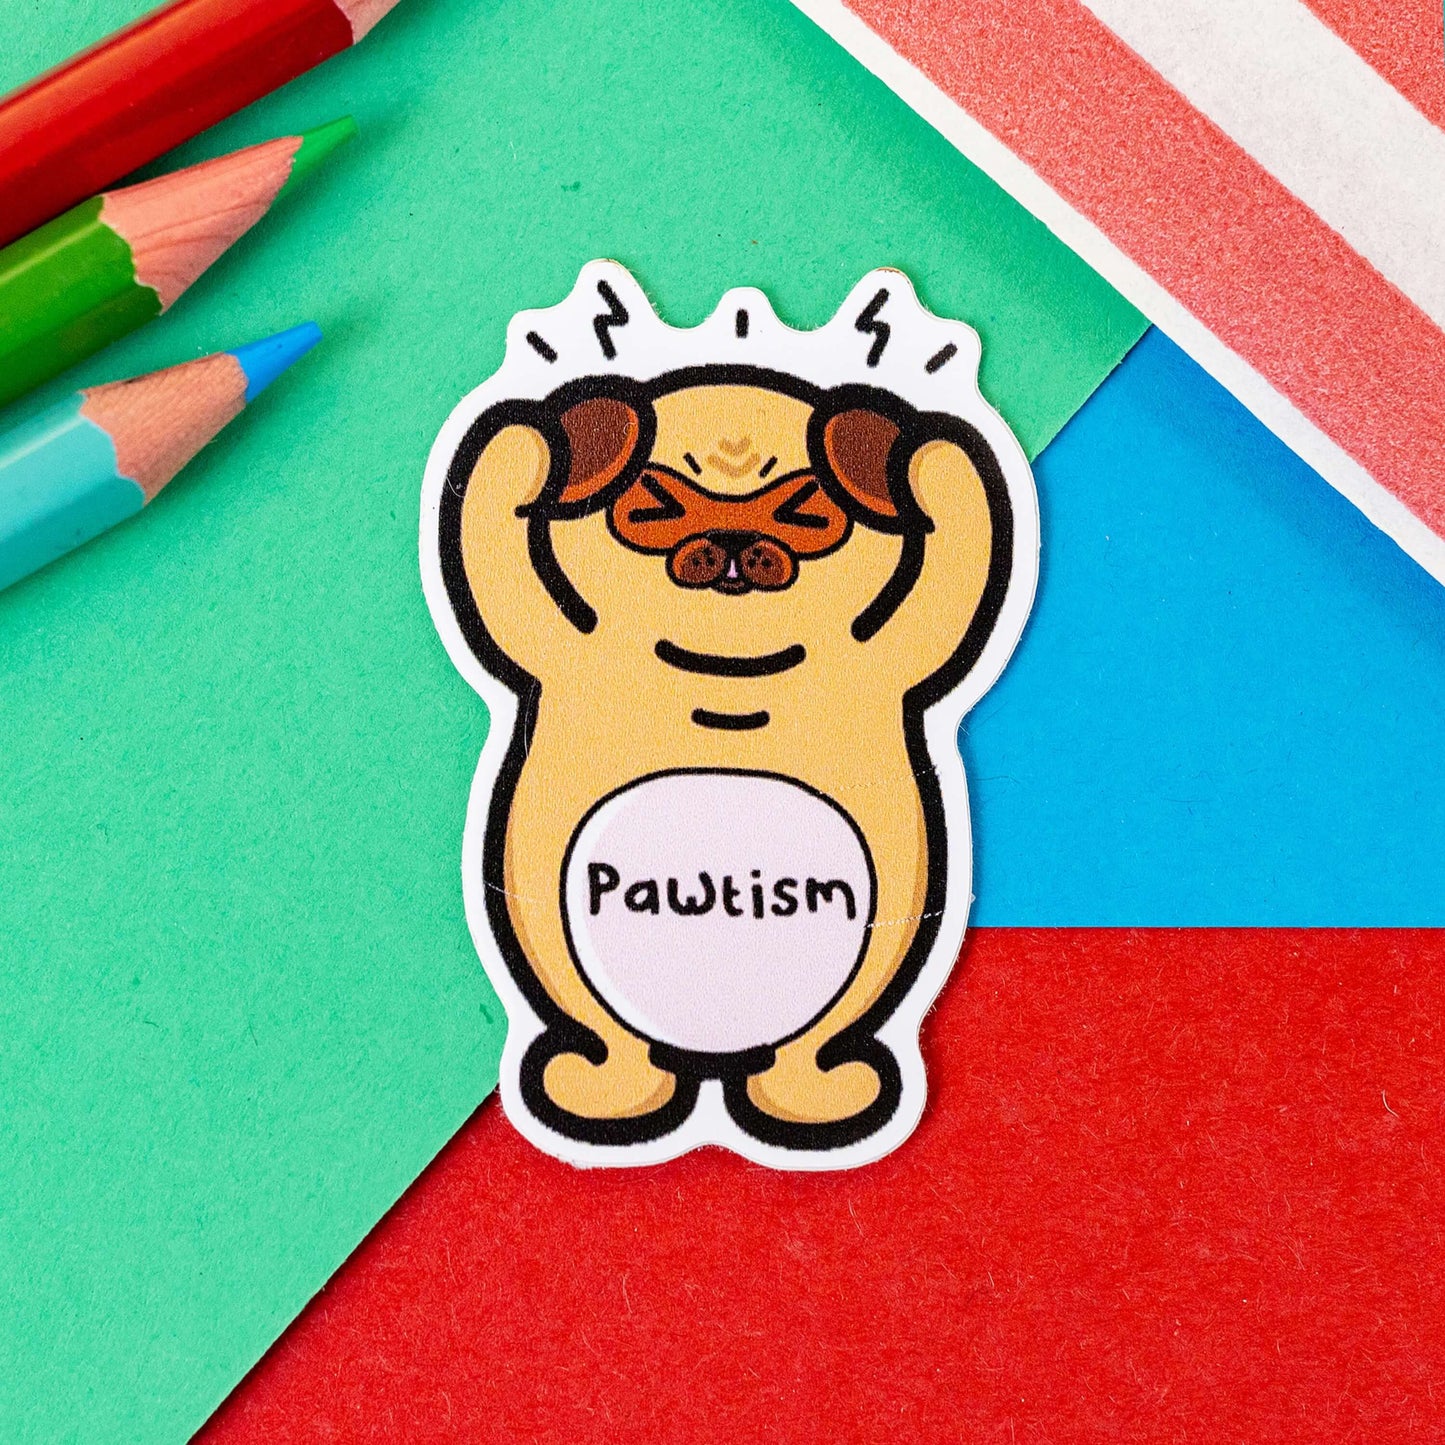 The Pawtism Dog Sticker - Autism on a red, blue and green background with colouring pencils and red stripe candy bag. The brown stressed pug dog sticker is stood up clutching its paws over its ears with black movement lines coming from its head, across its middle in black reads 'pawtism'. The hand drawn design is raising awareness for autism and neurodivergence.